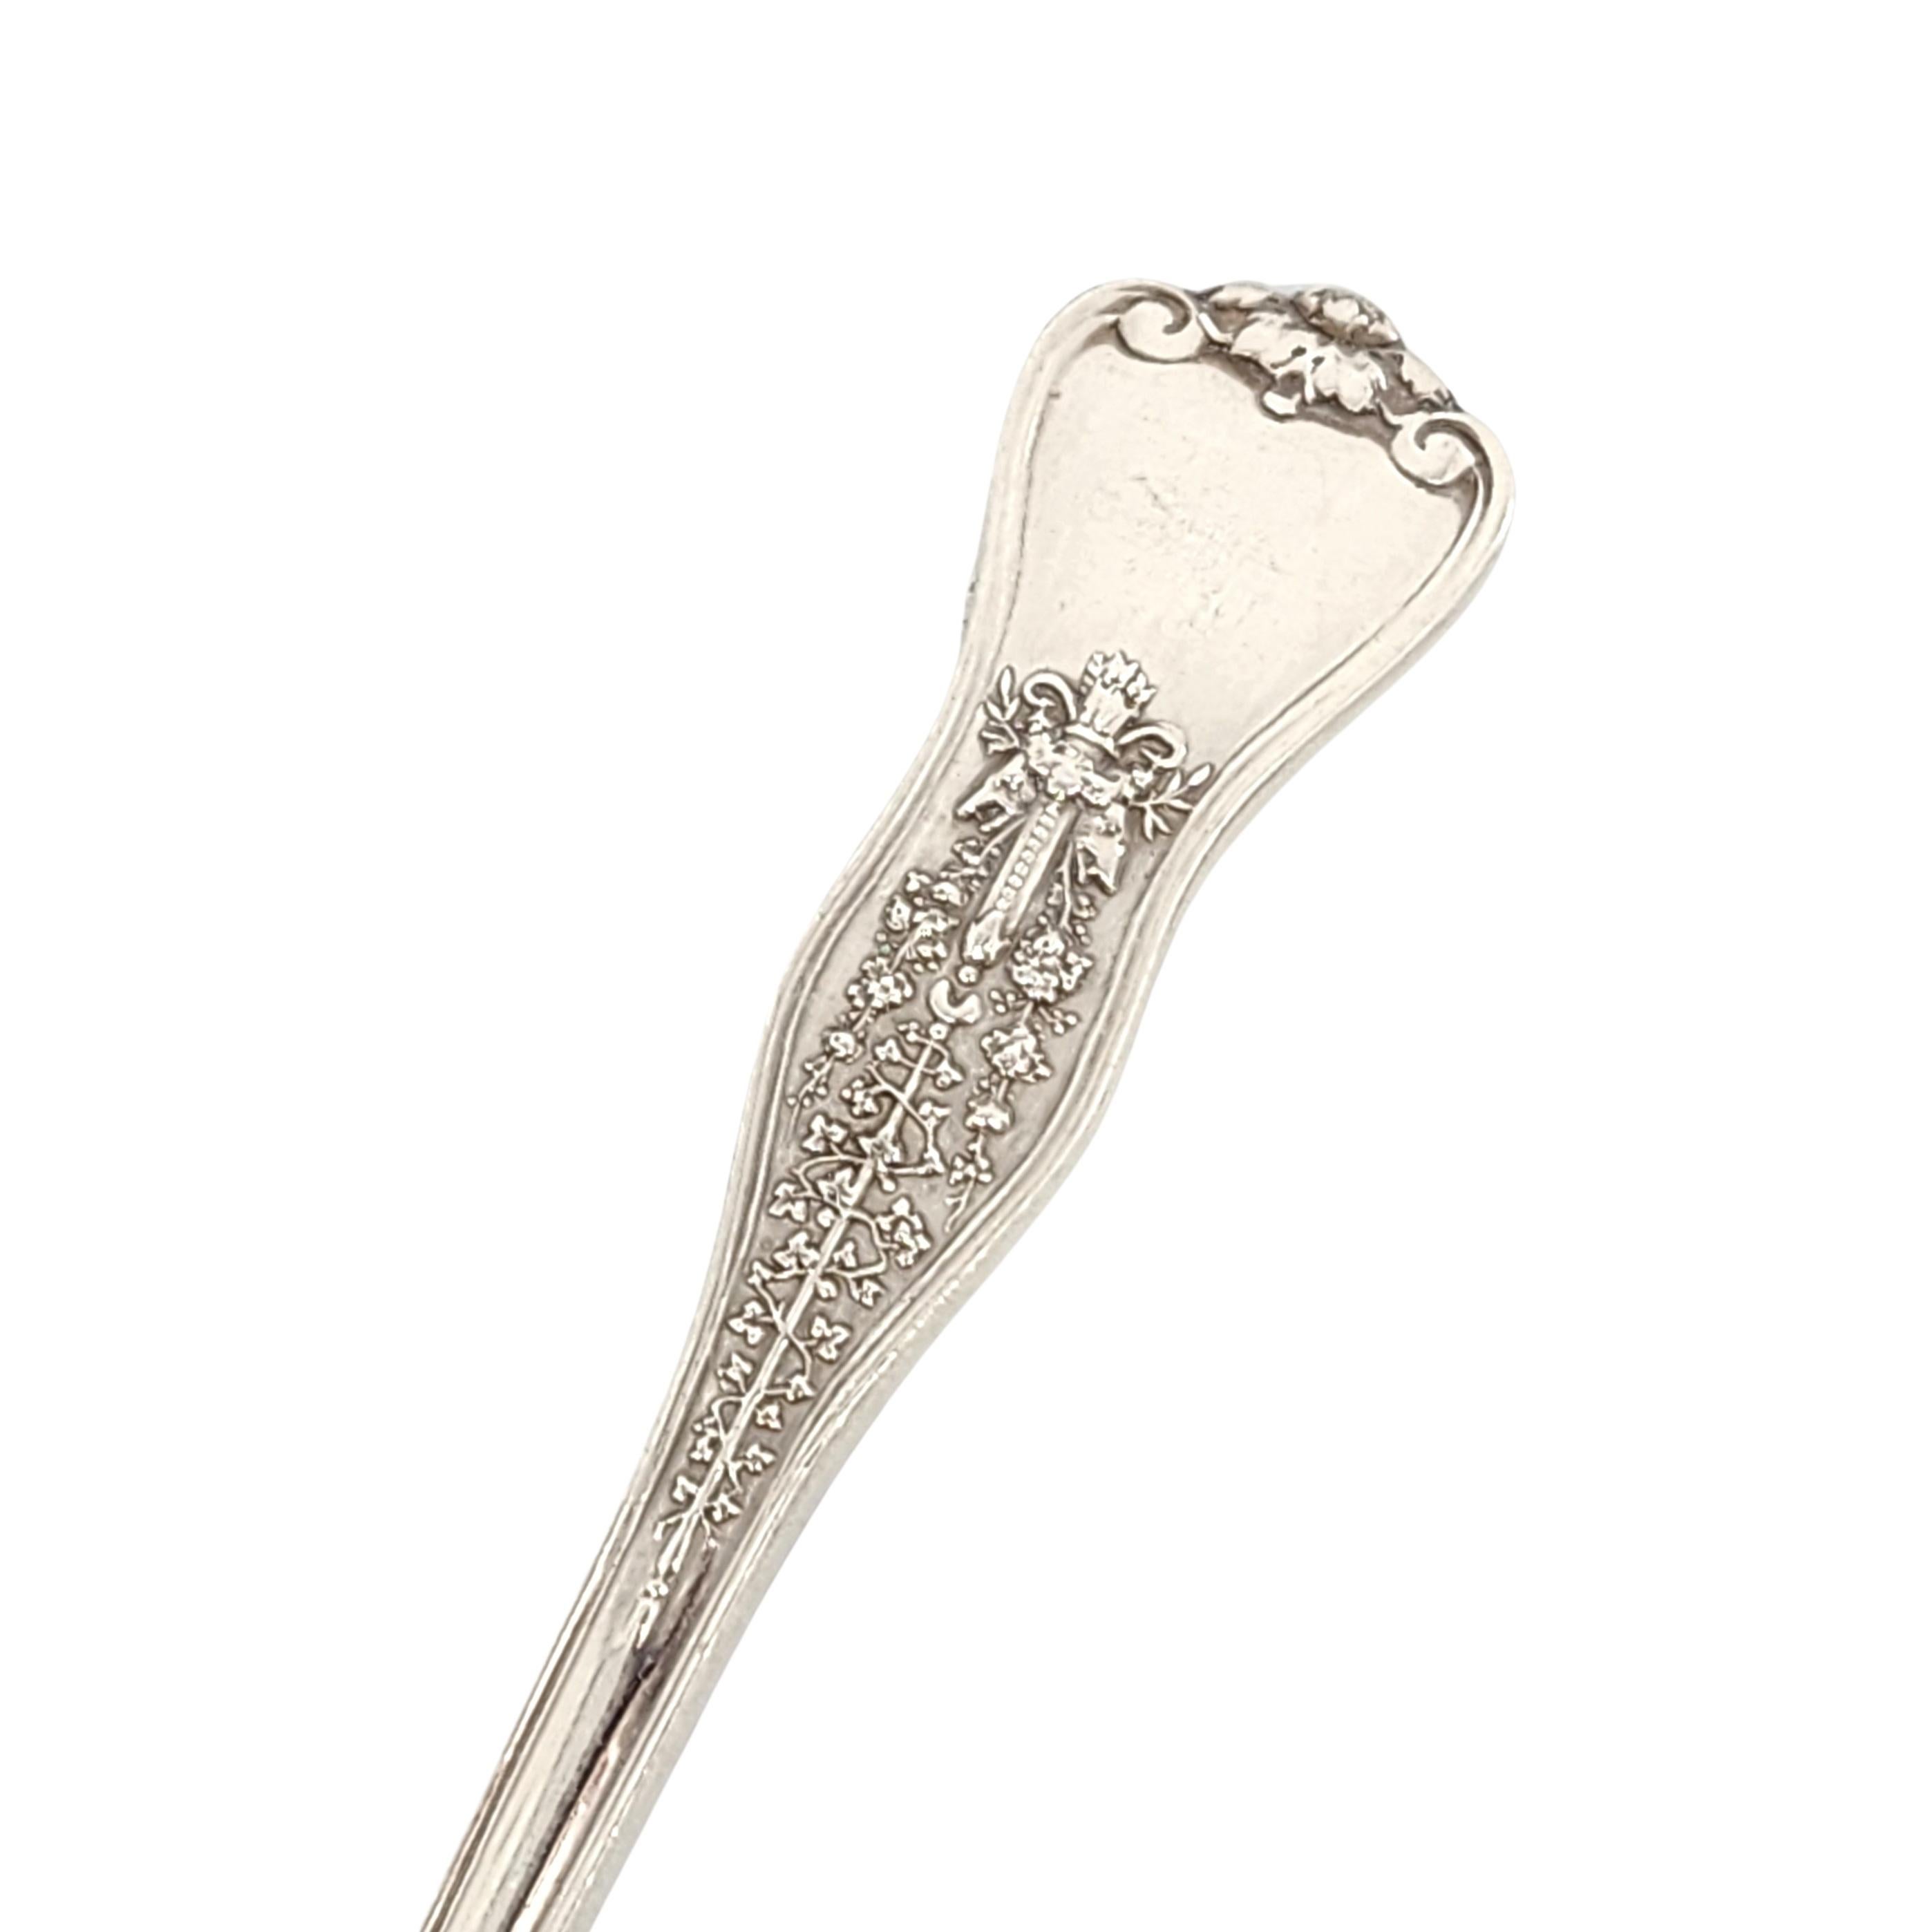 Set of 4 sterling silver Cocktail/Oyster forks by Tiffany & Co in the Olympian pattern.

No monogram

Olympian is an ornate and elaborate multi-motif pattern, featuring 17 different sharply carved handle decorations depicting scenes from Classical